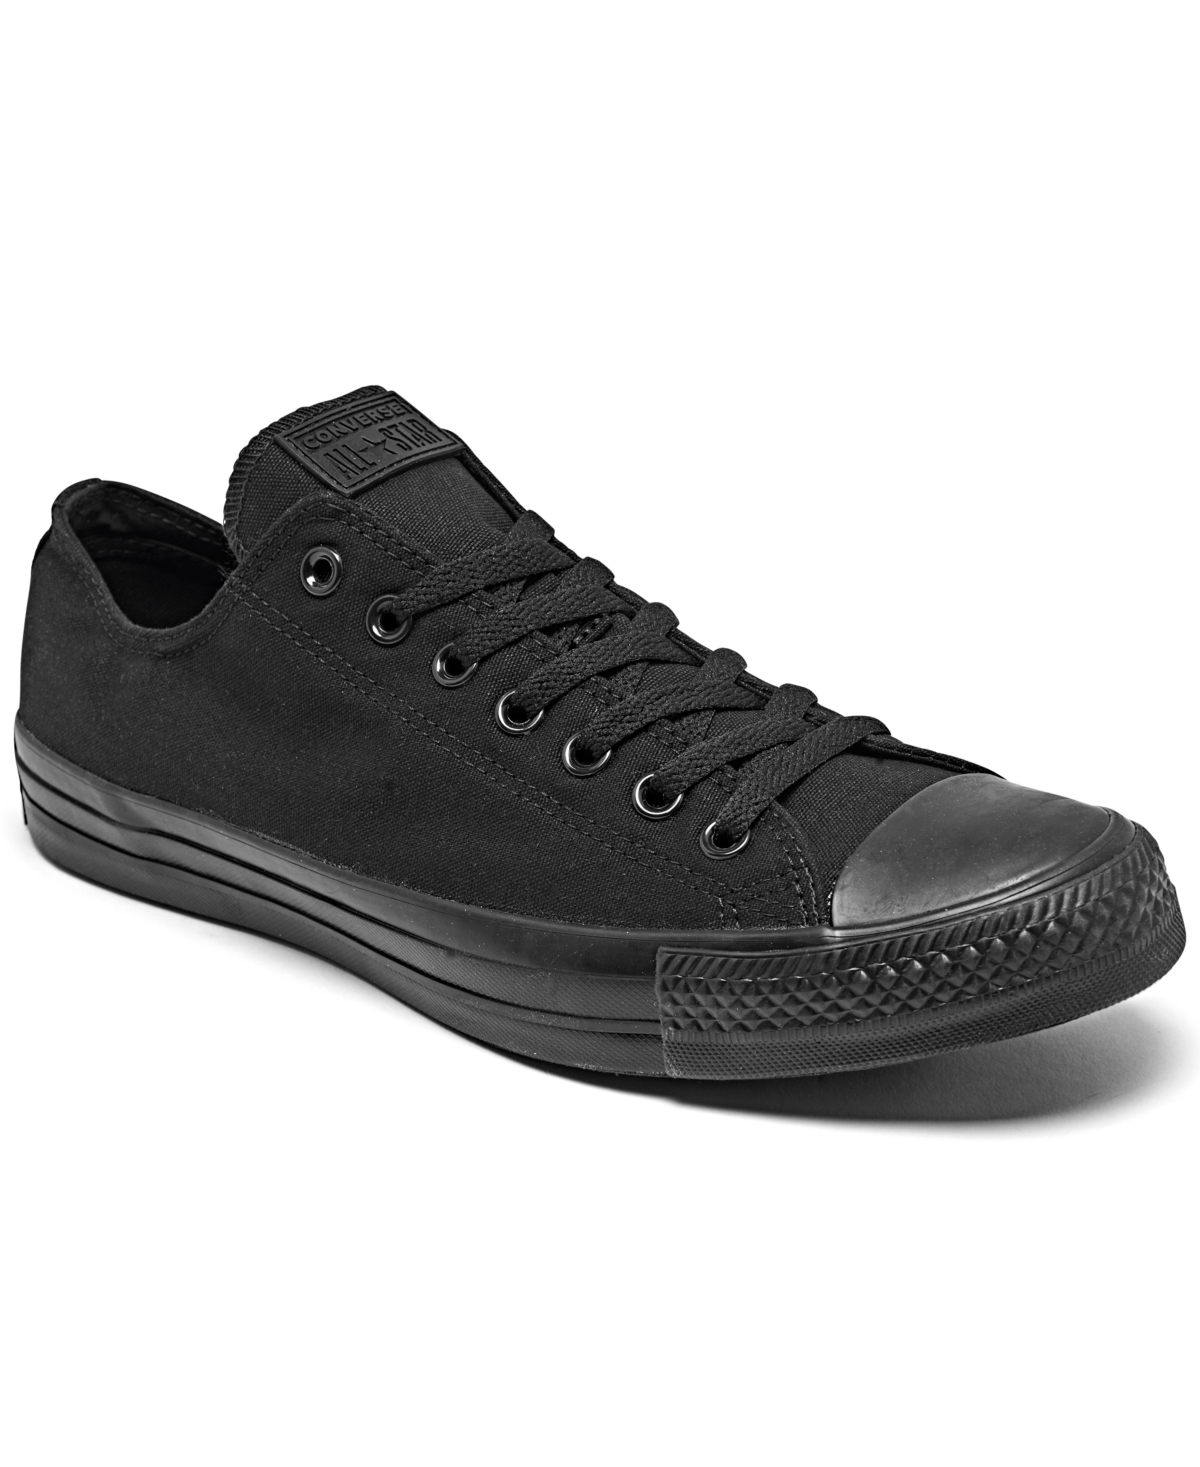 UPC 022859737395 product image for Converse Men's Chuck Taylor Low Top Sneakers from Finish Line | upcitemdb.com